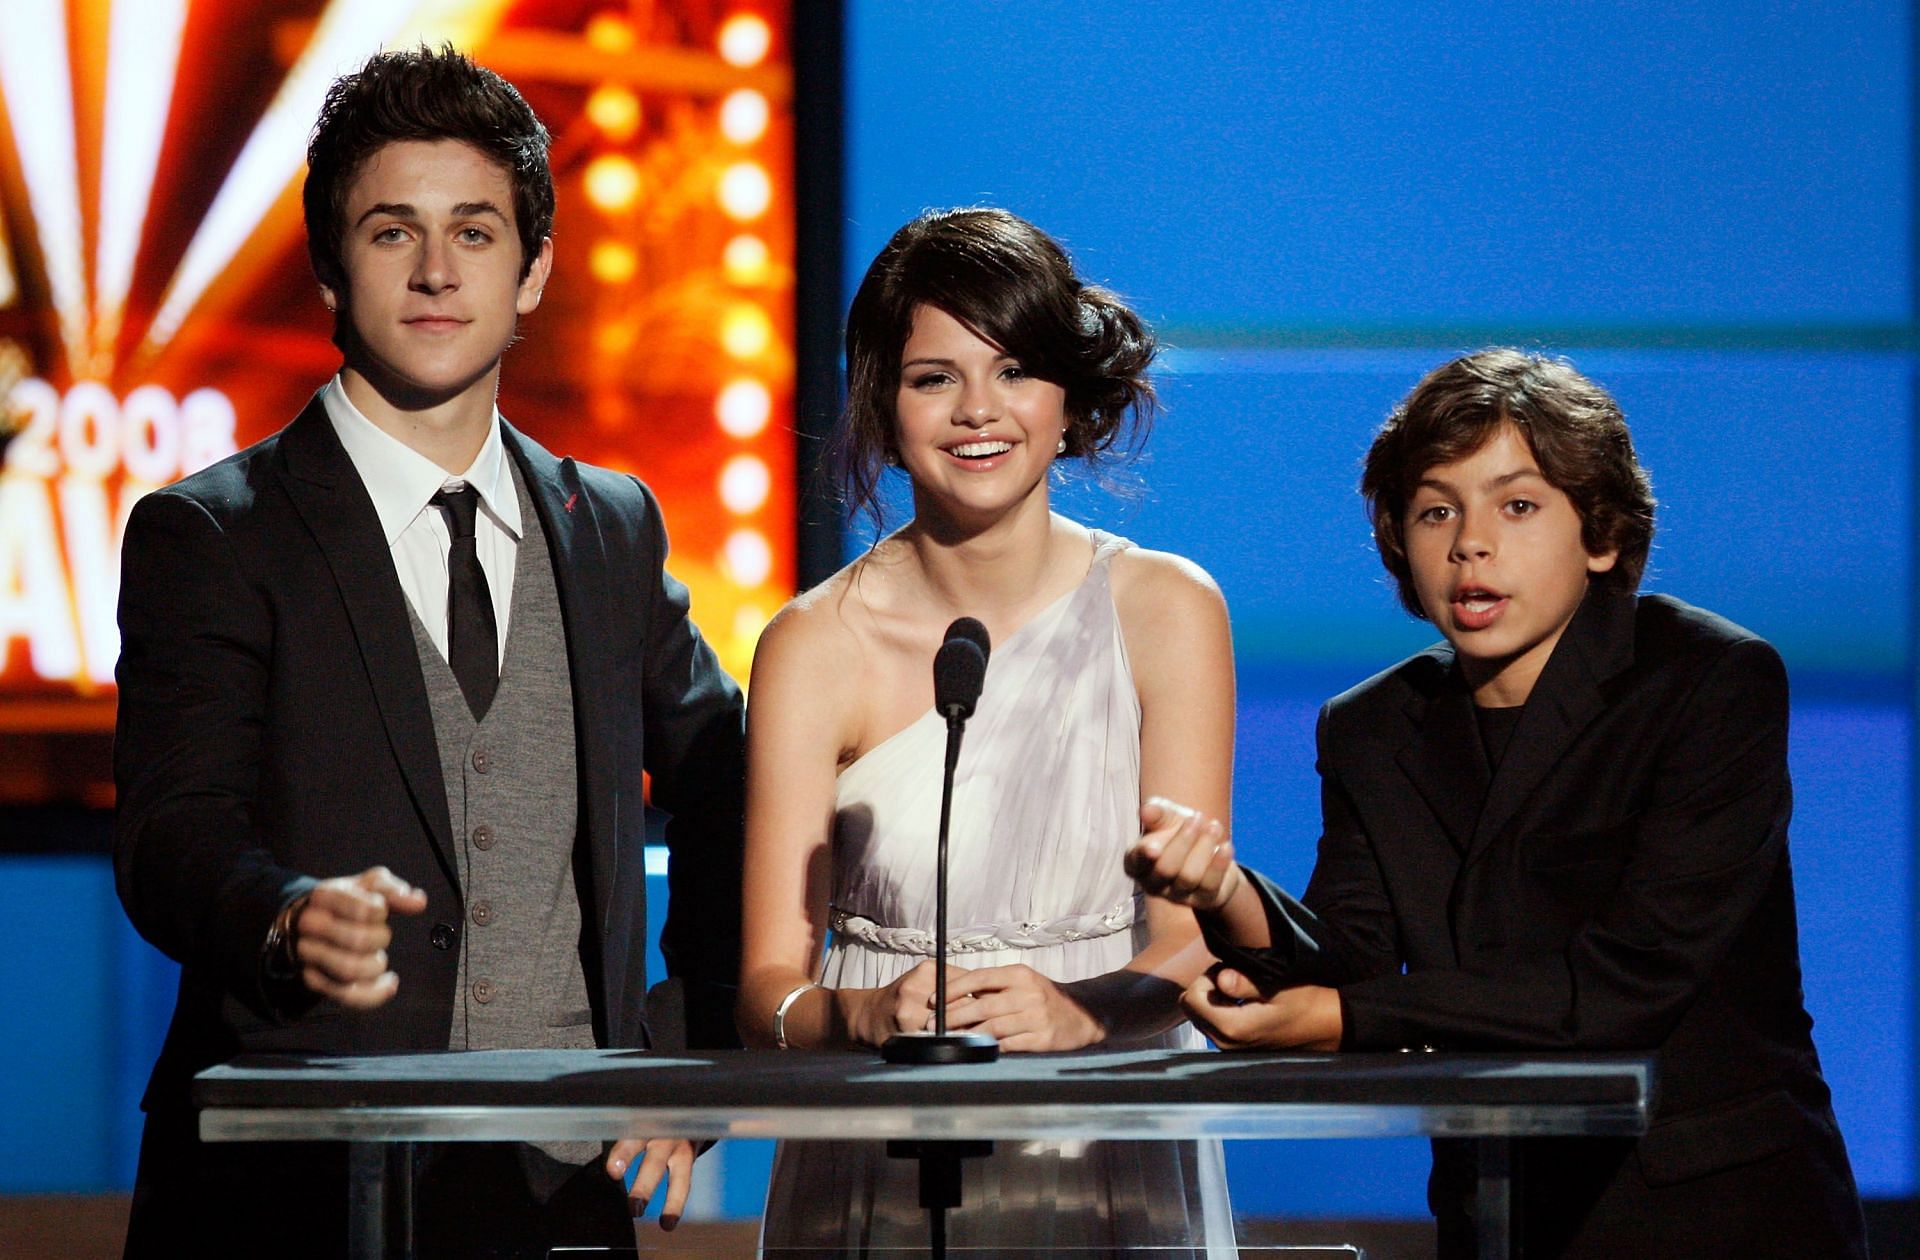 The 2008 ALMA Awards. (Photo by Vince Bucci/Getty Images)